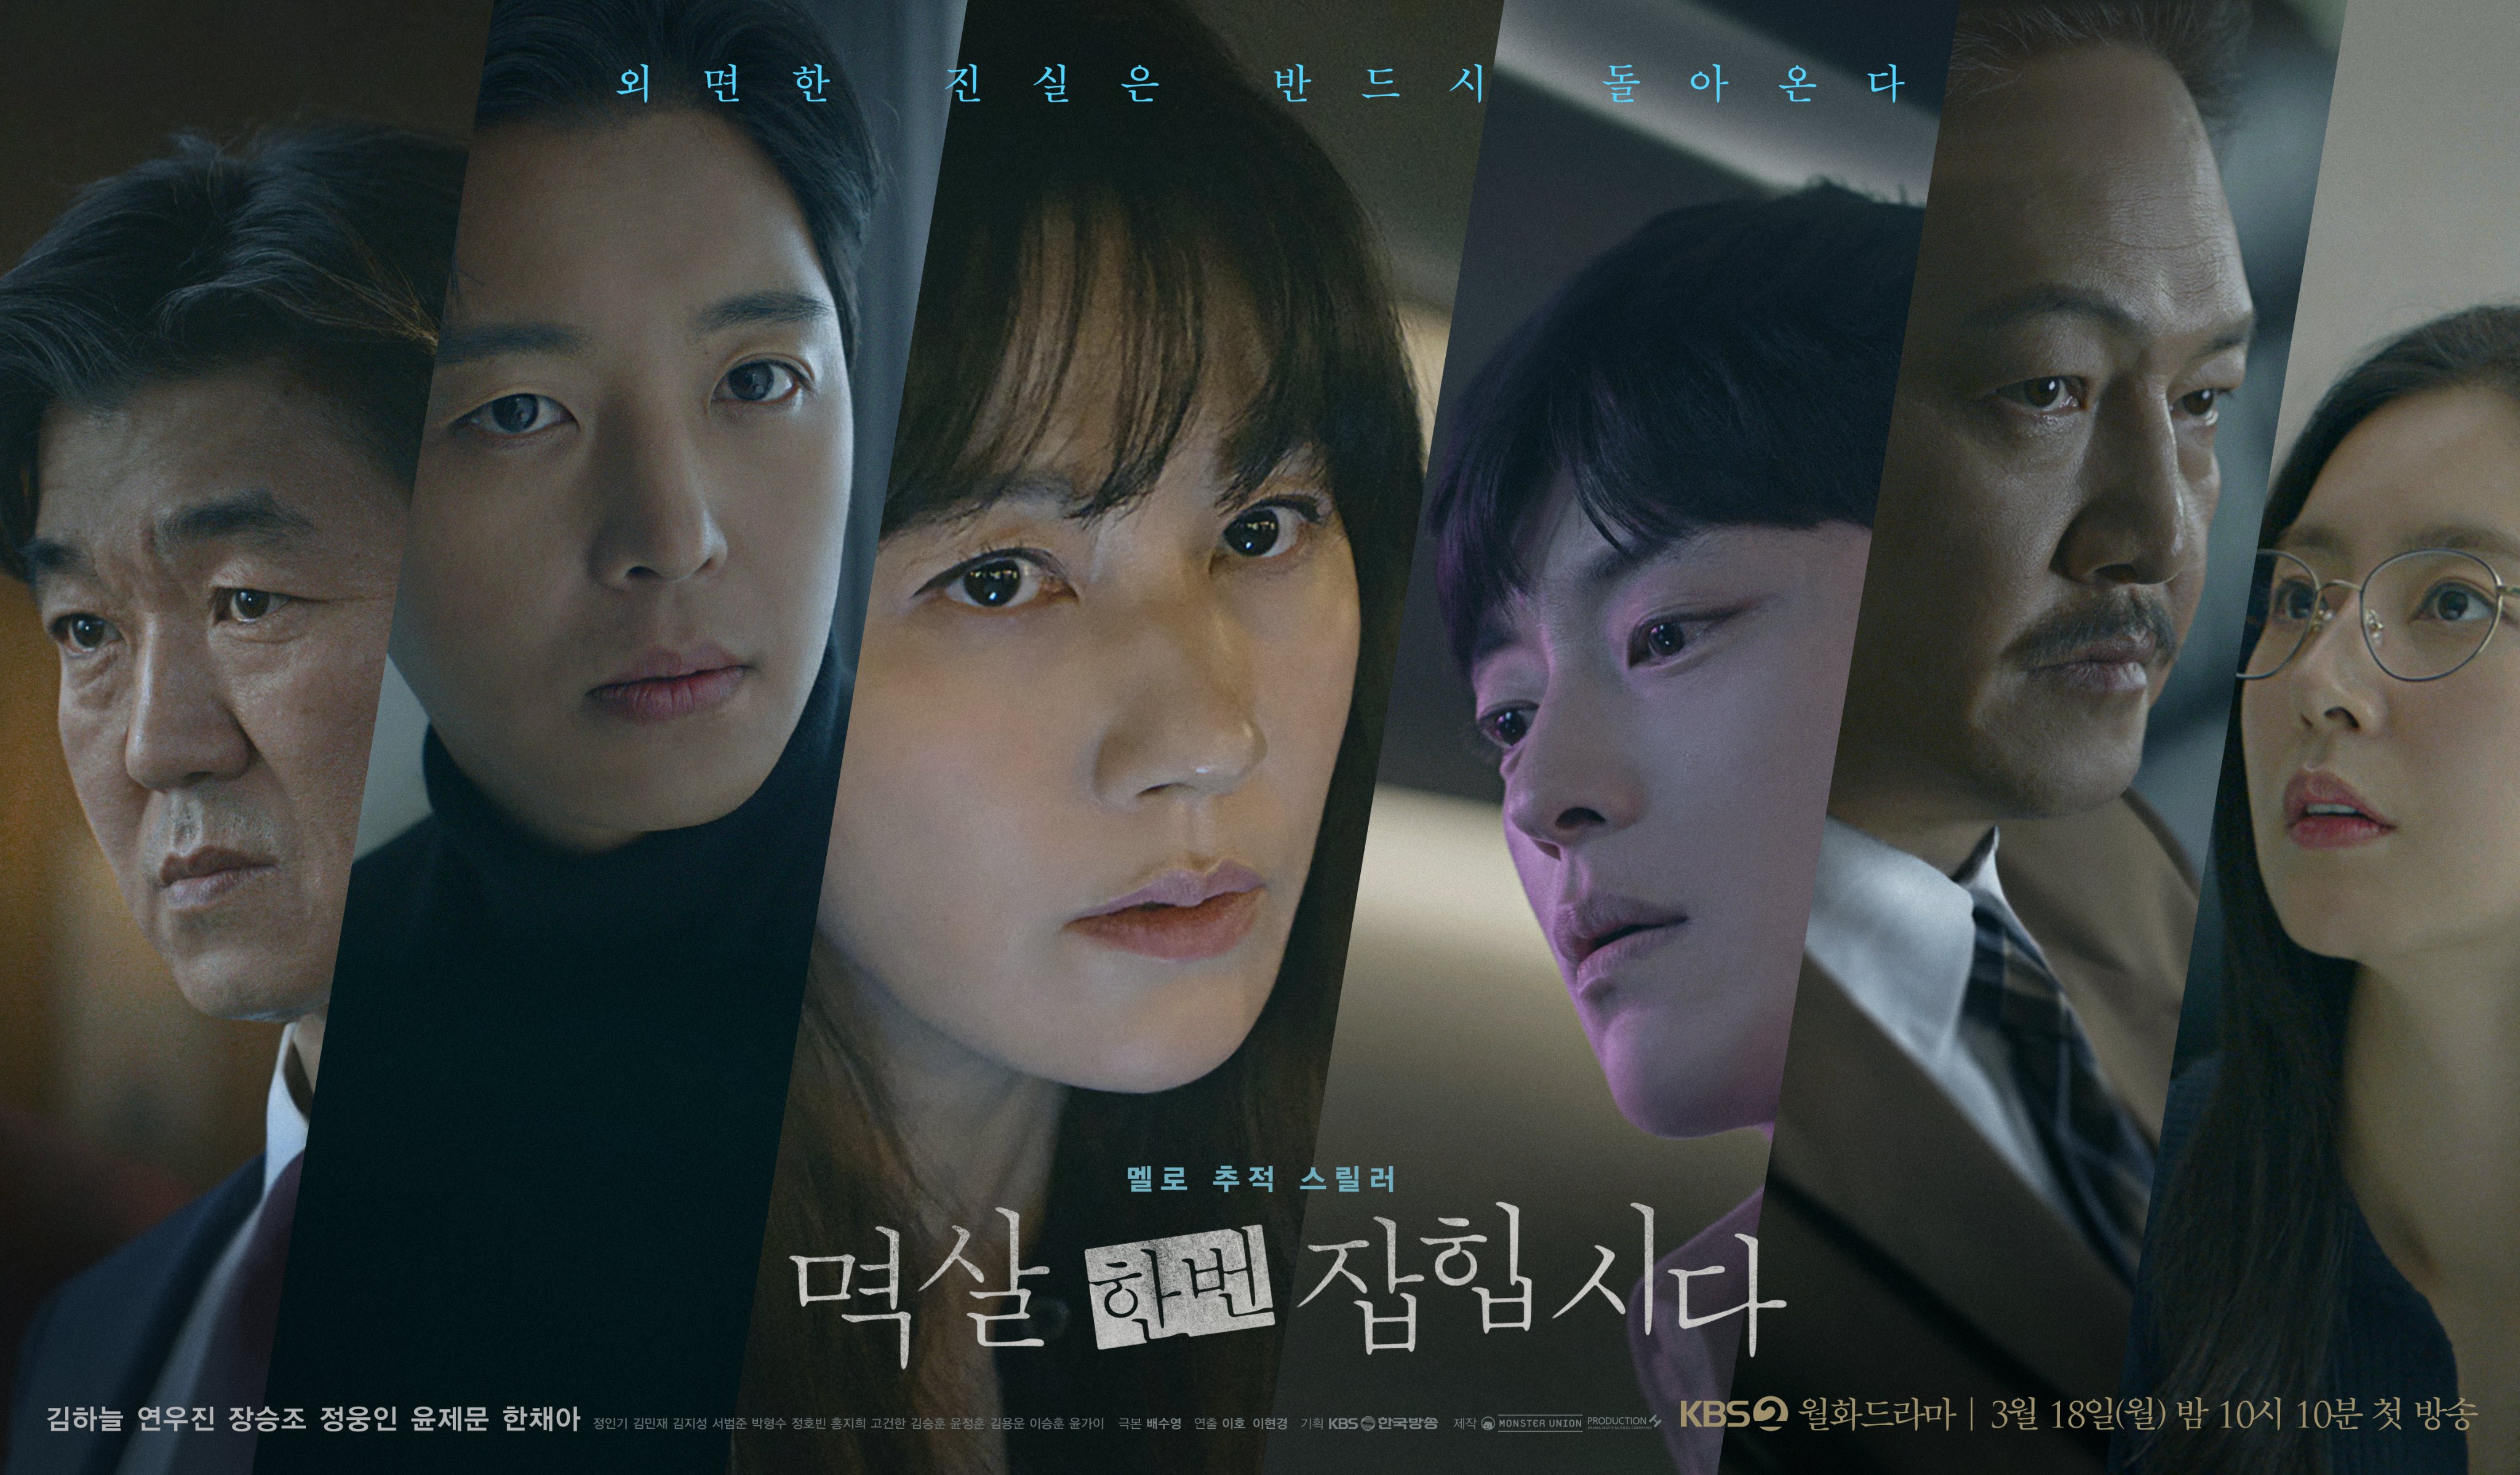 Kim Ha Neul, Yeon Woo Jin, Jang Seung Jo, And More Are Mysteriously Interwoven In “Grabbed By The Collar” Poster